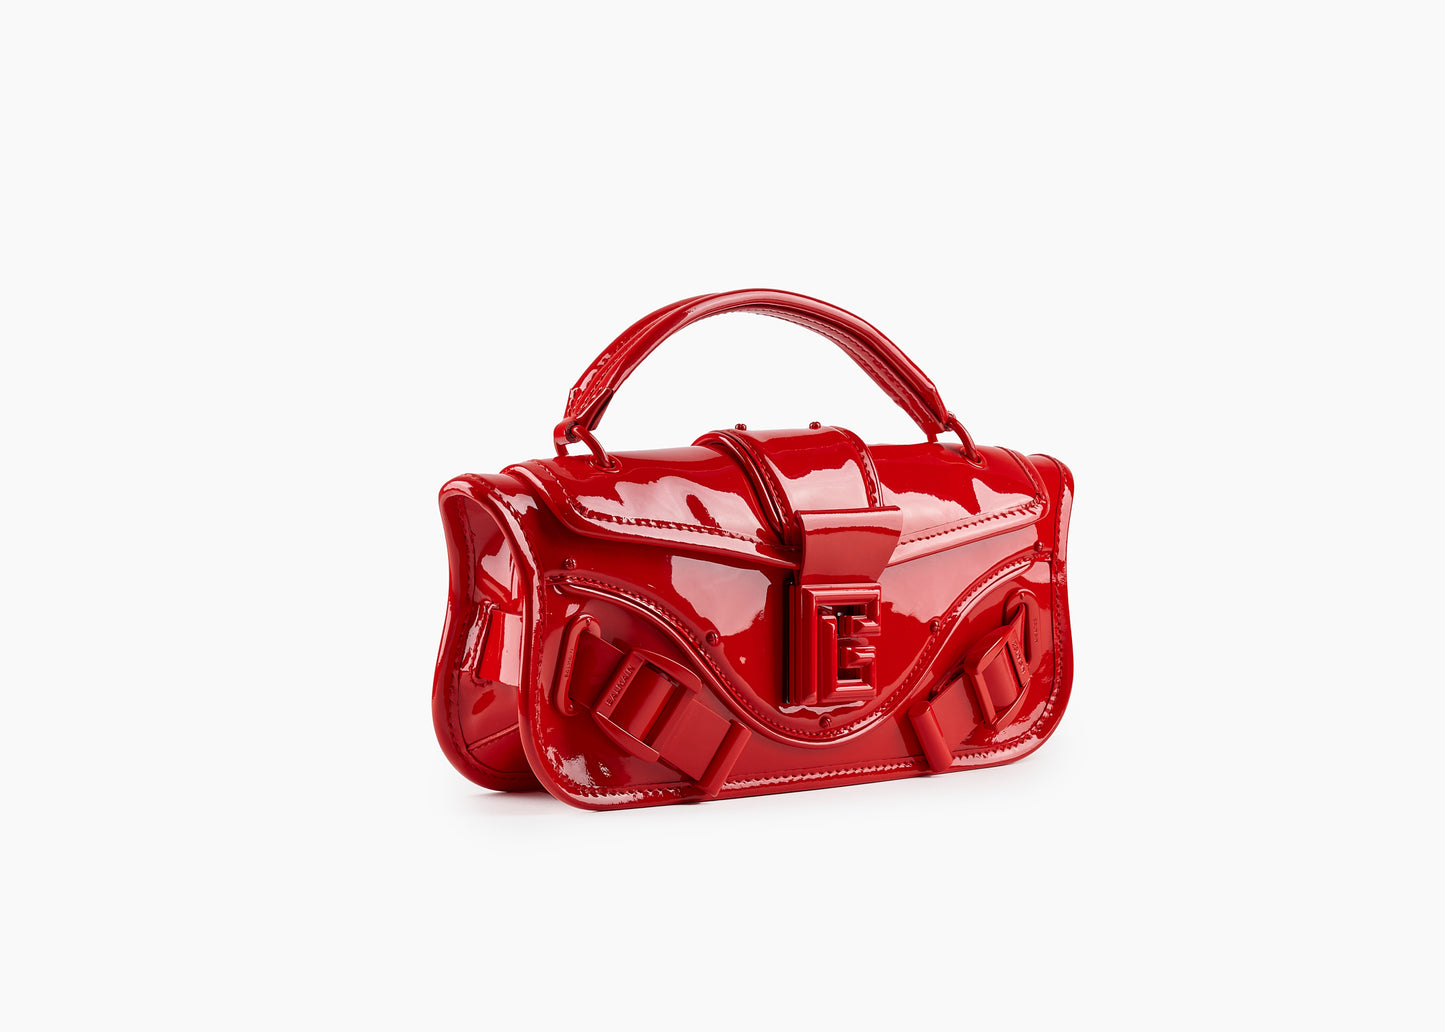 Blaze Pouch Clutch Bag Patent Leather Red